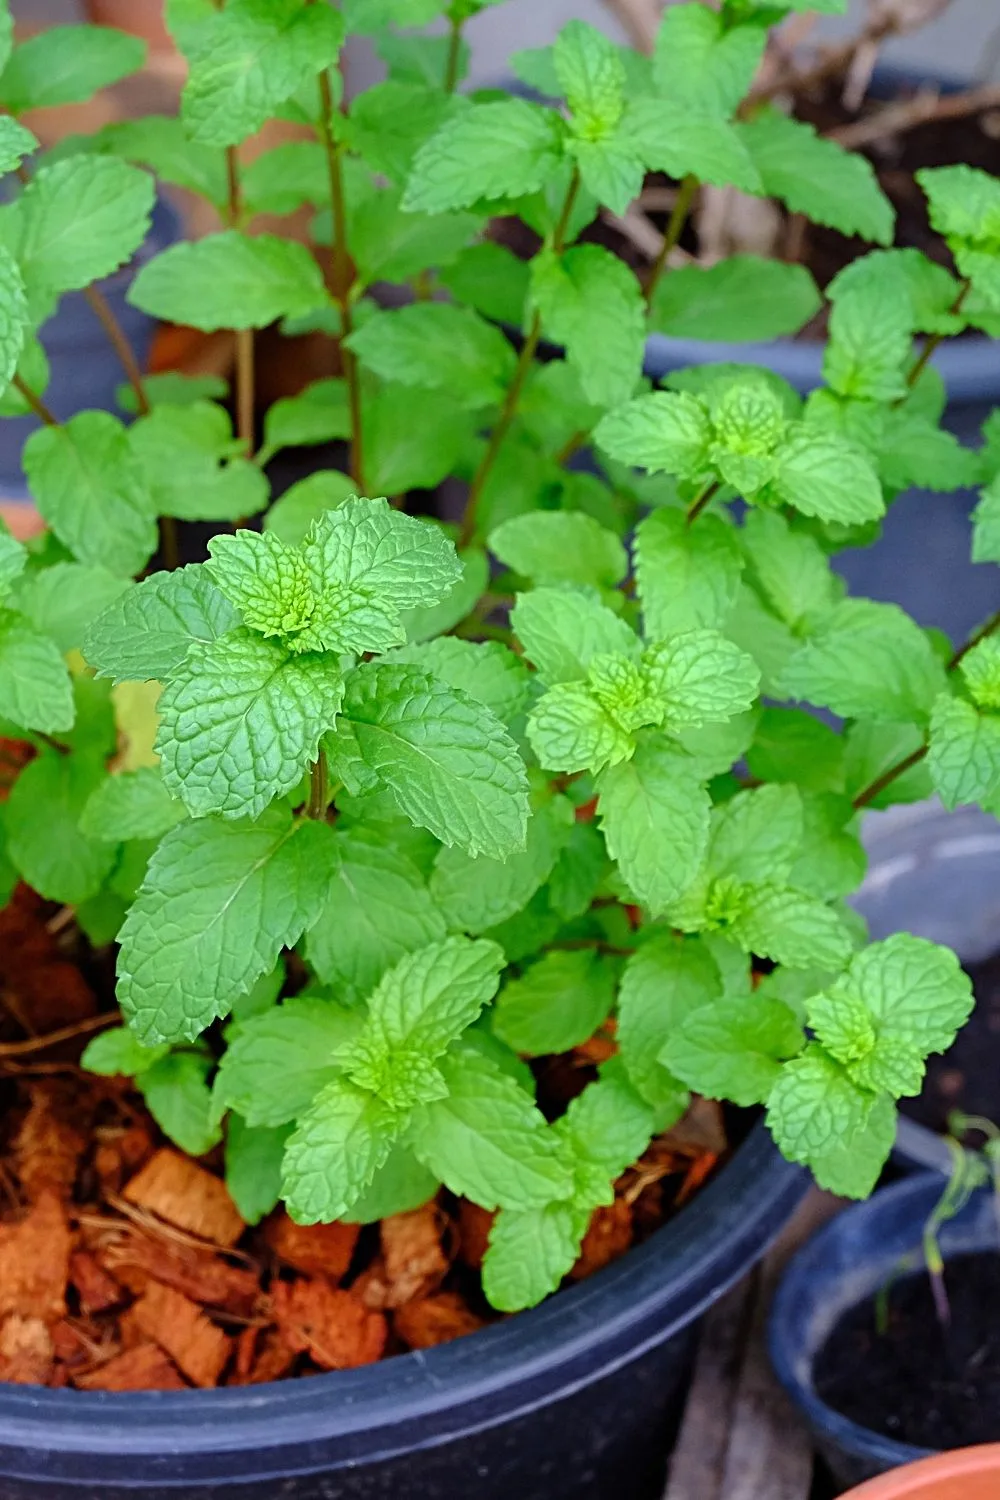 Once your mint contracts the mint rust, repot the healthy part of the Mint plant in fresh soil, increasing its airflow